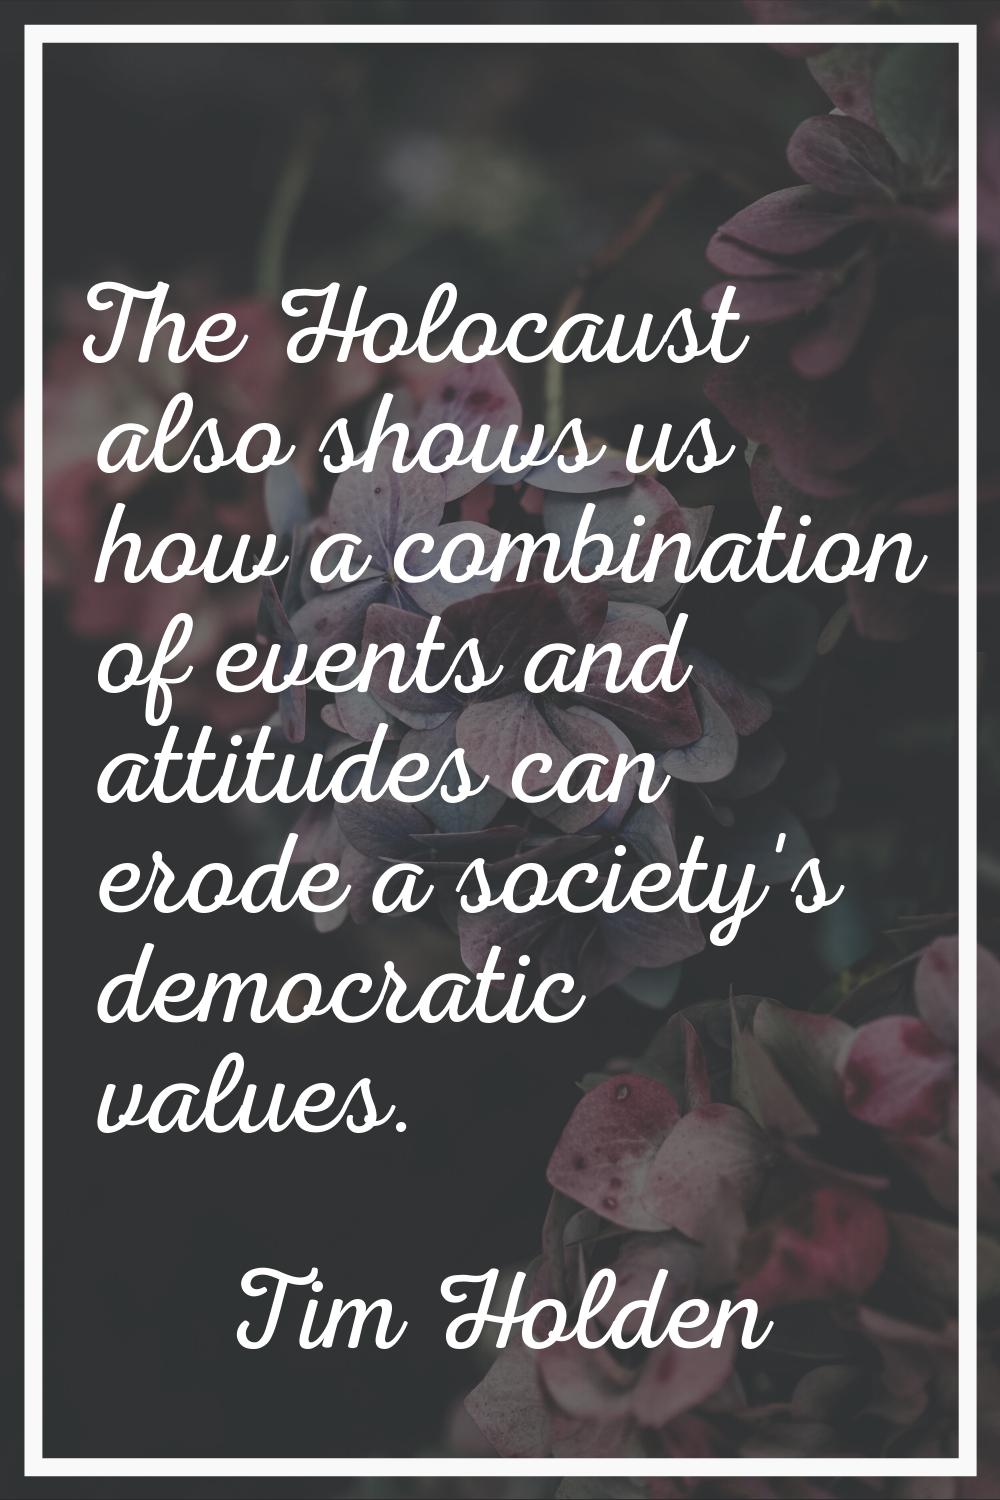 The Holocaust also shows us how a combination of events and attitudes can erode a society's democra